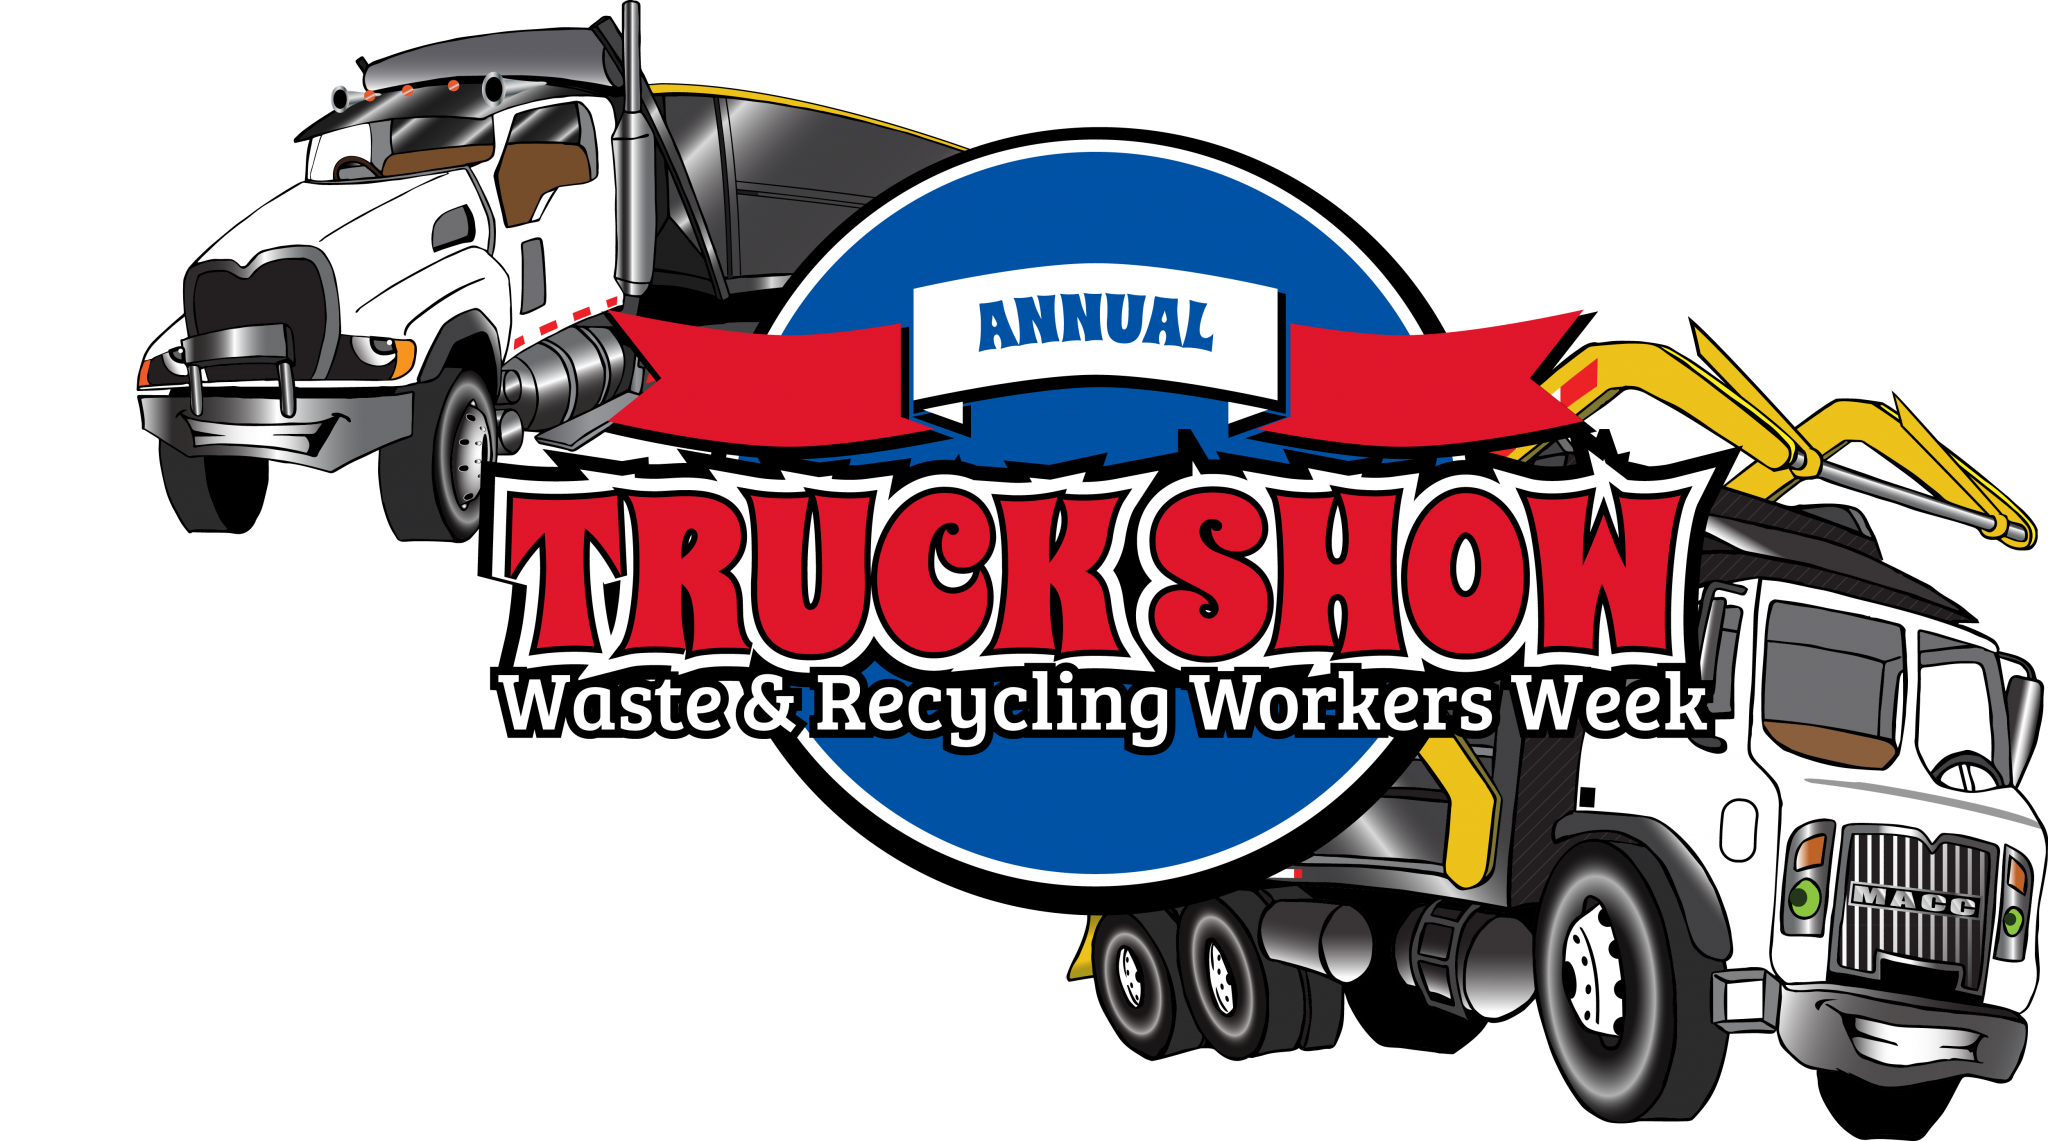 Waste & Recycling Workers Week Truck Show Waste and Recycling Workers